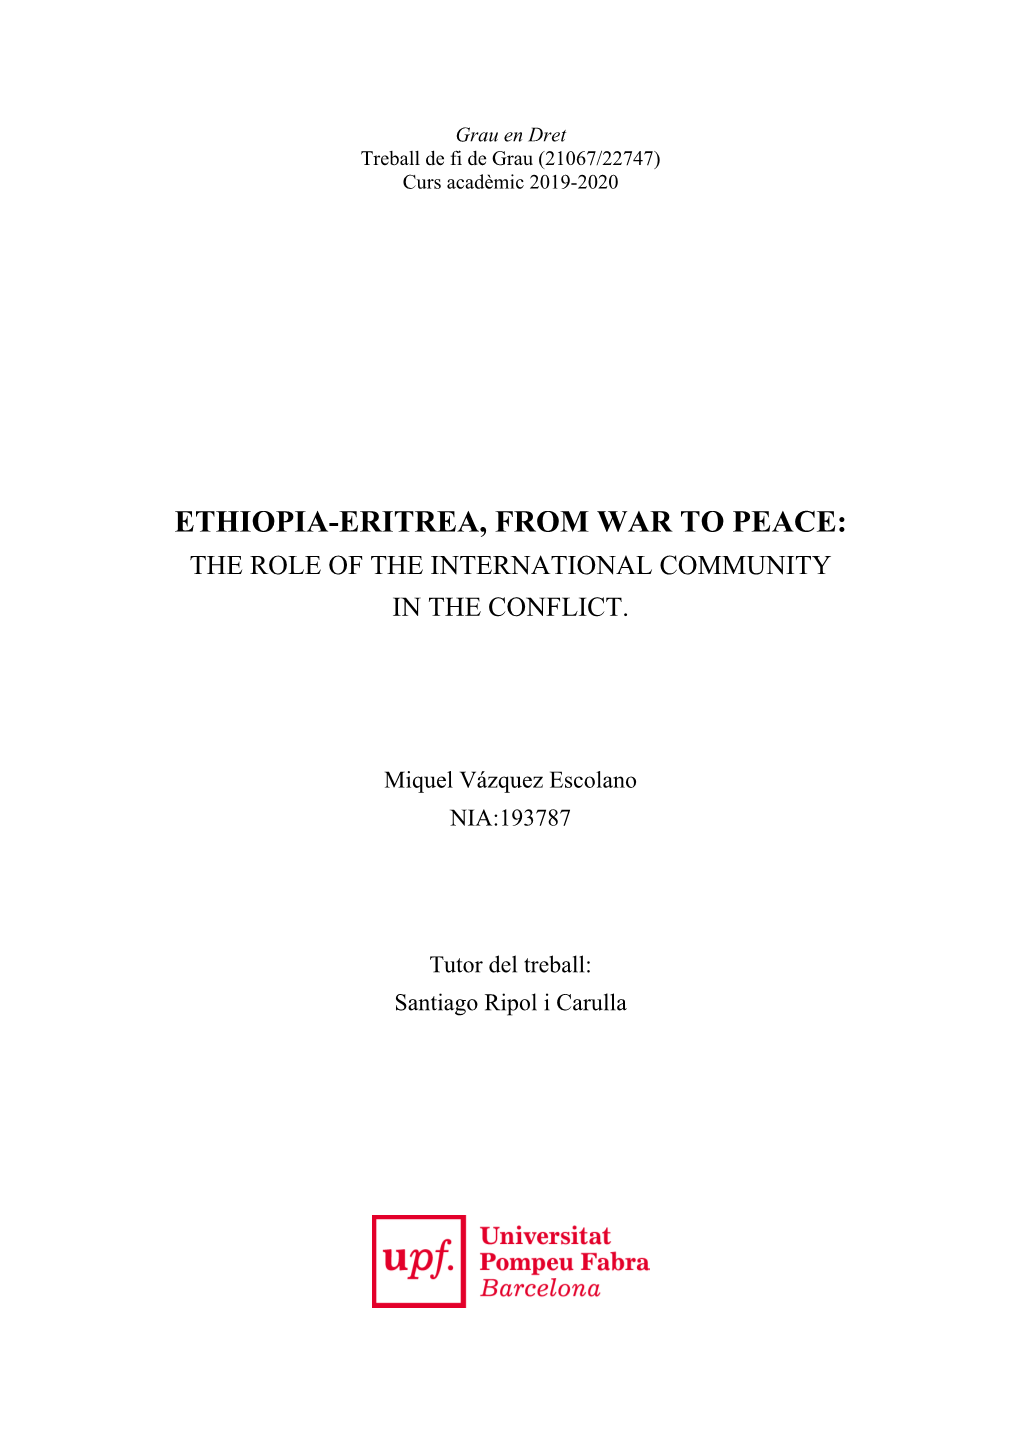 Ethiopia-Eritrea, from War to Peace: the Role of the International Community in the Conflict